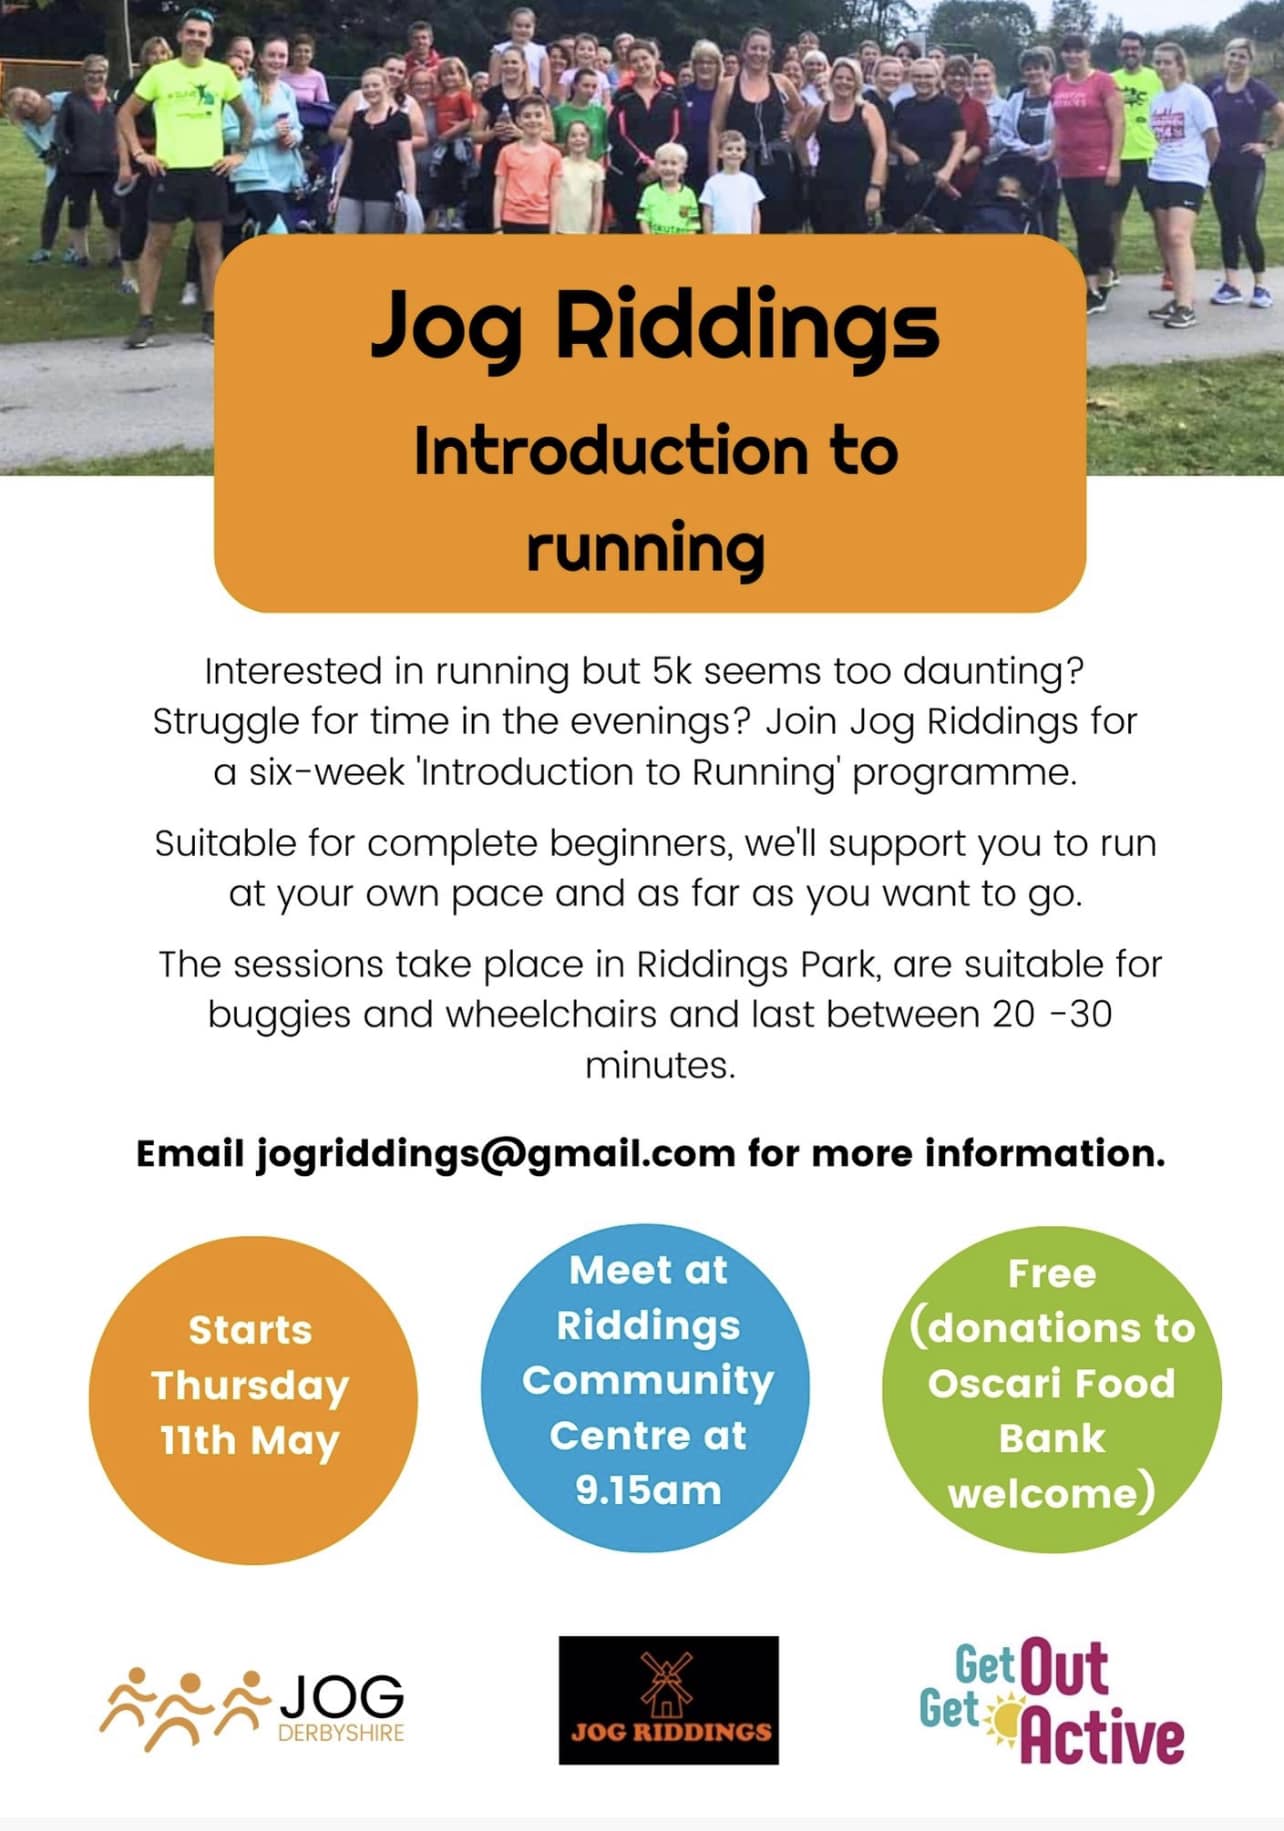 New 'Introduction to Running' programme to start in Riddings